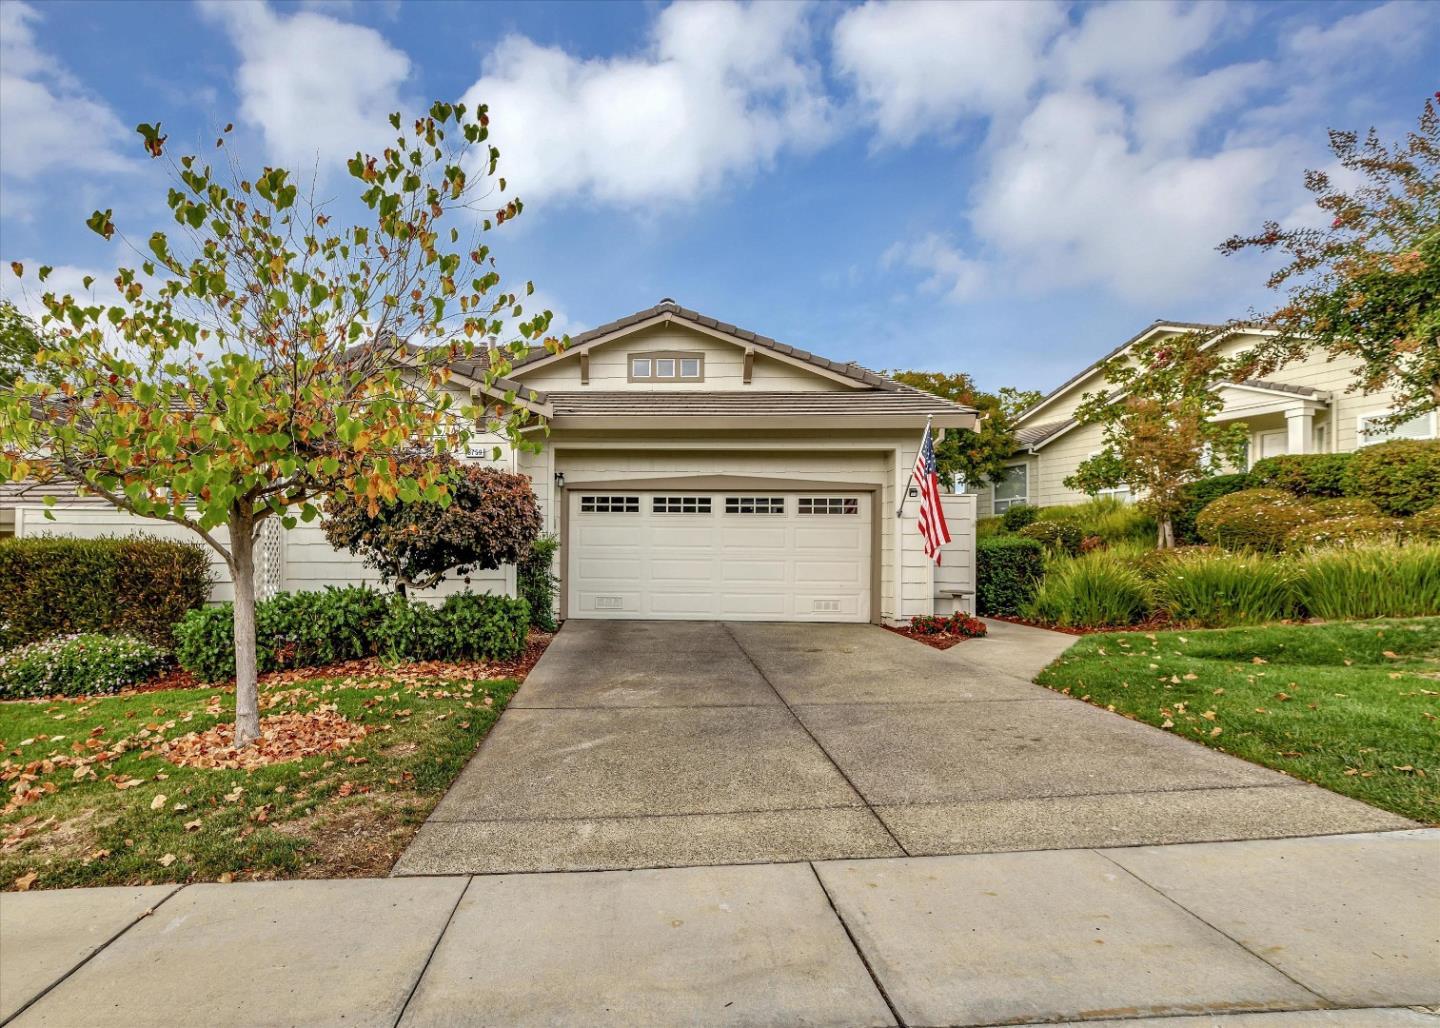 Photo of 8759 Mccarty Ranch Dr in San Jose, CA